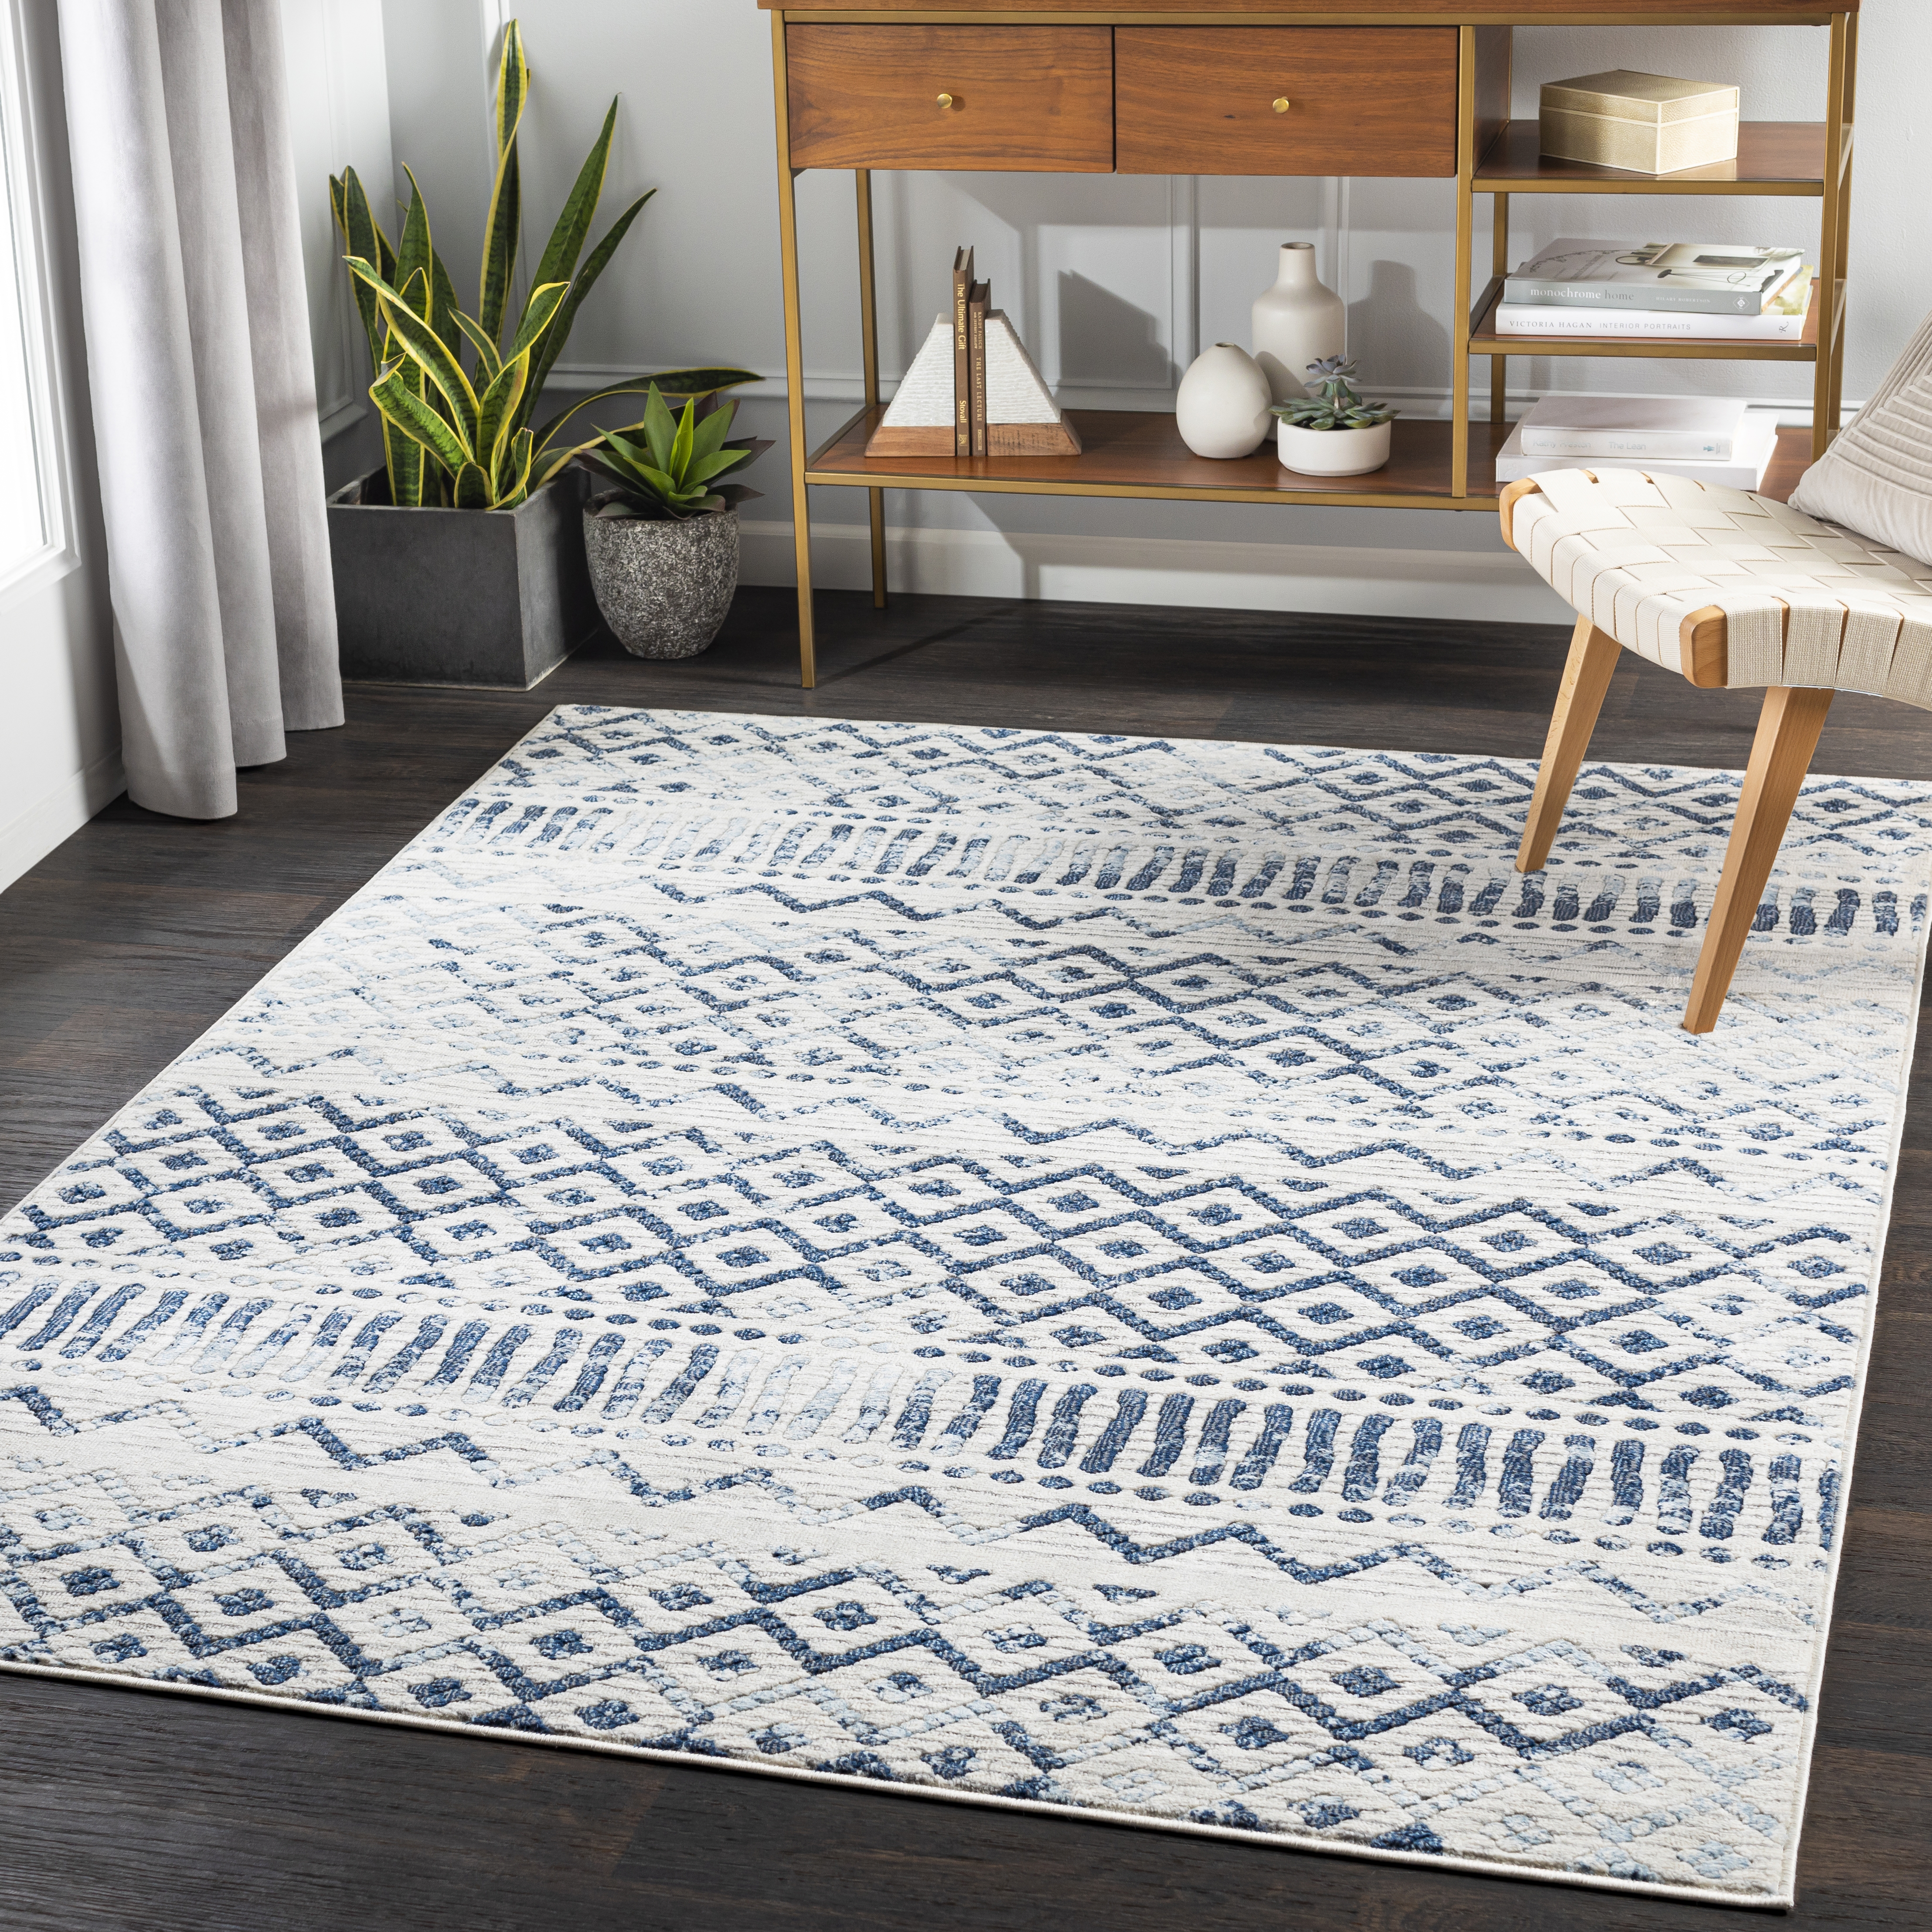 Remy Rug, 7'10" x 10' - Image 1